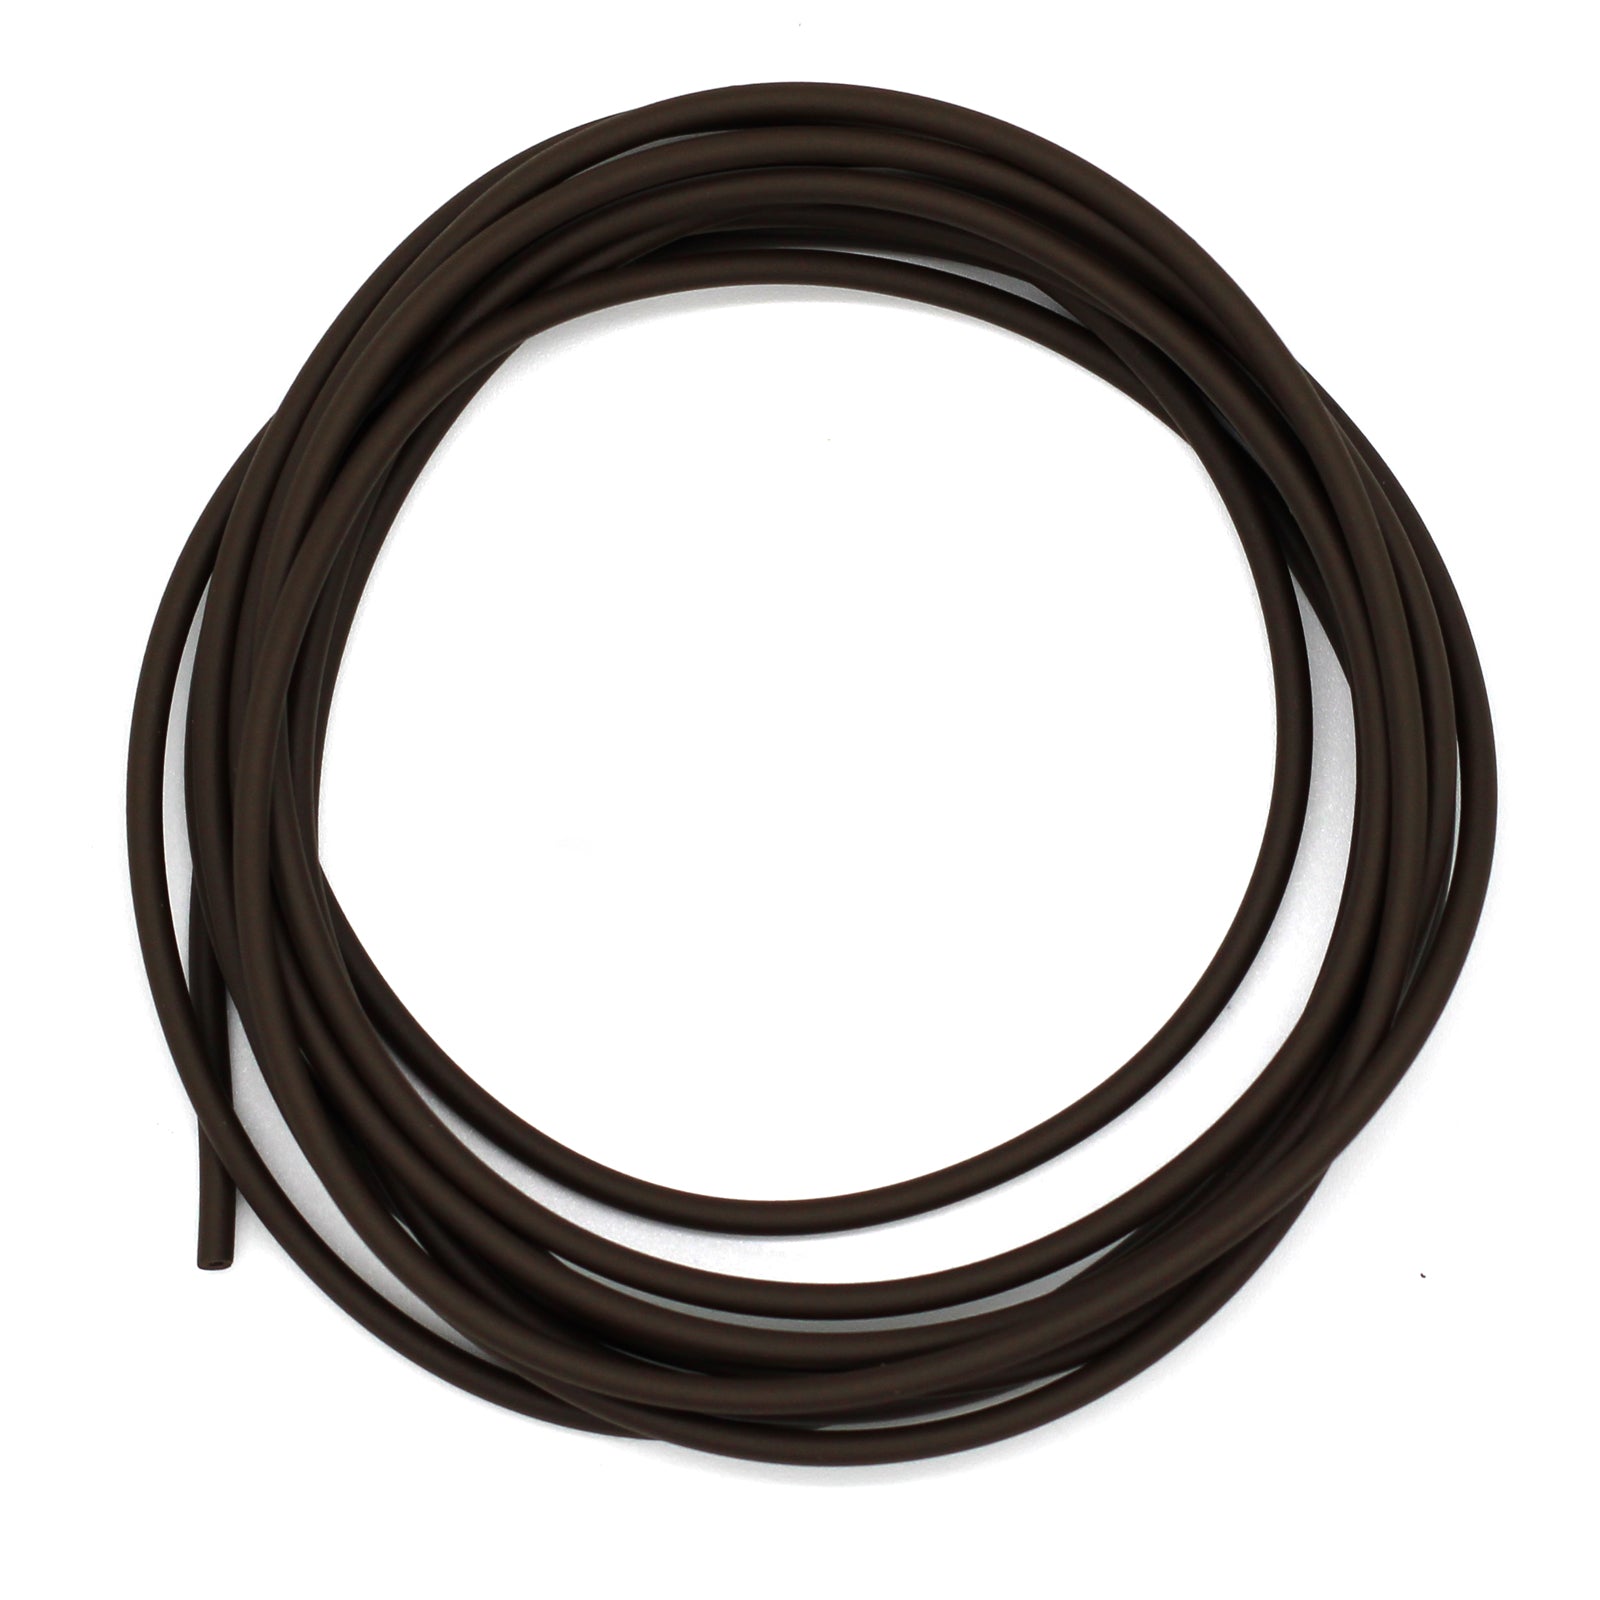 Deception Angling Tungsten Tubing for Fishing Silt Camo Brown